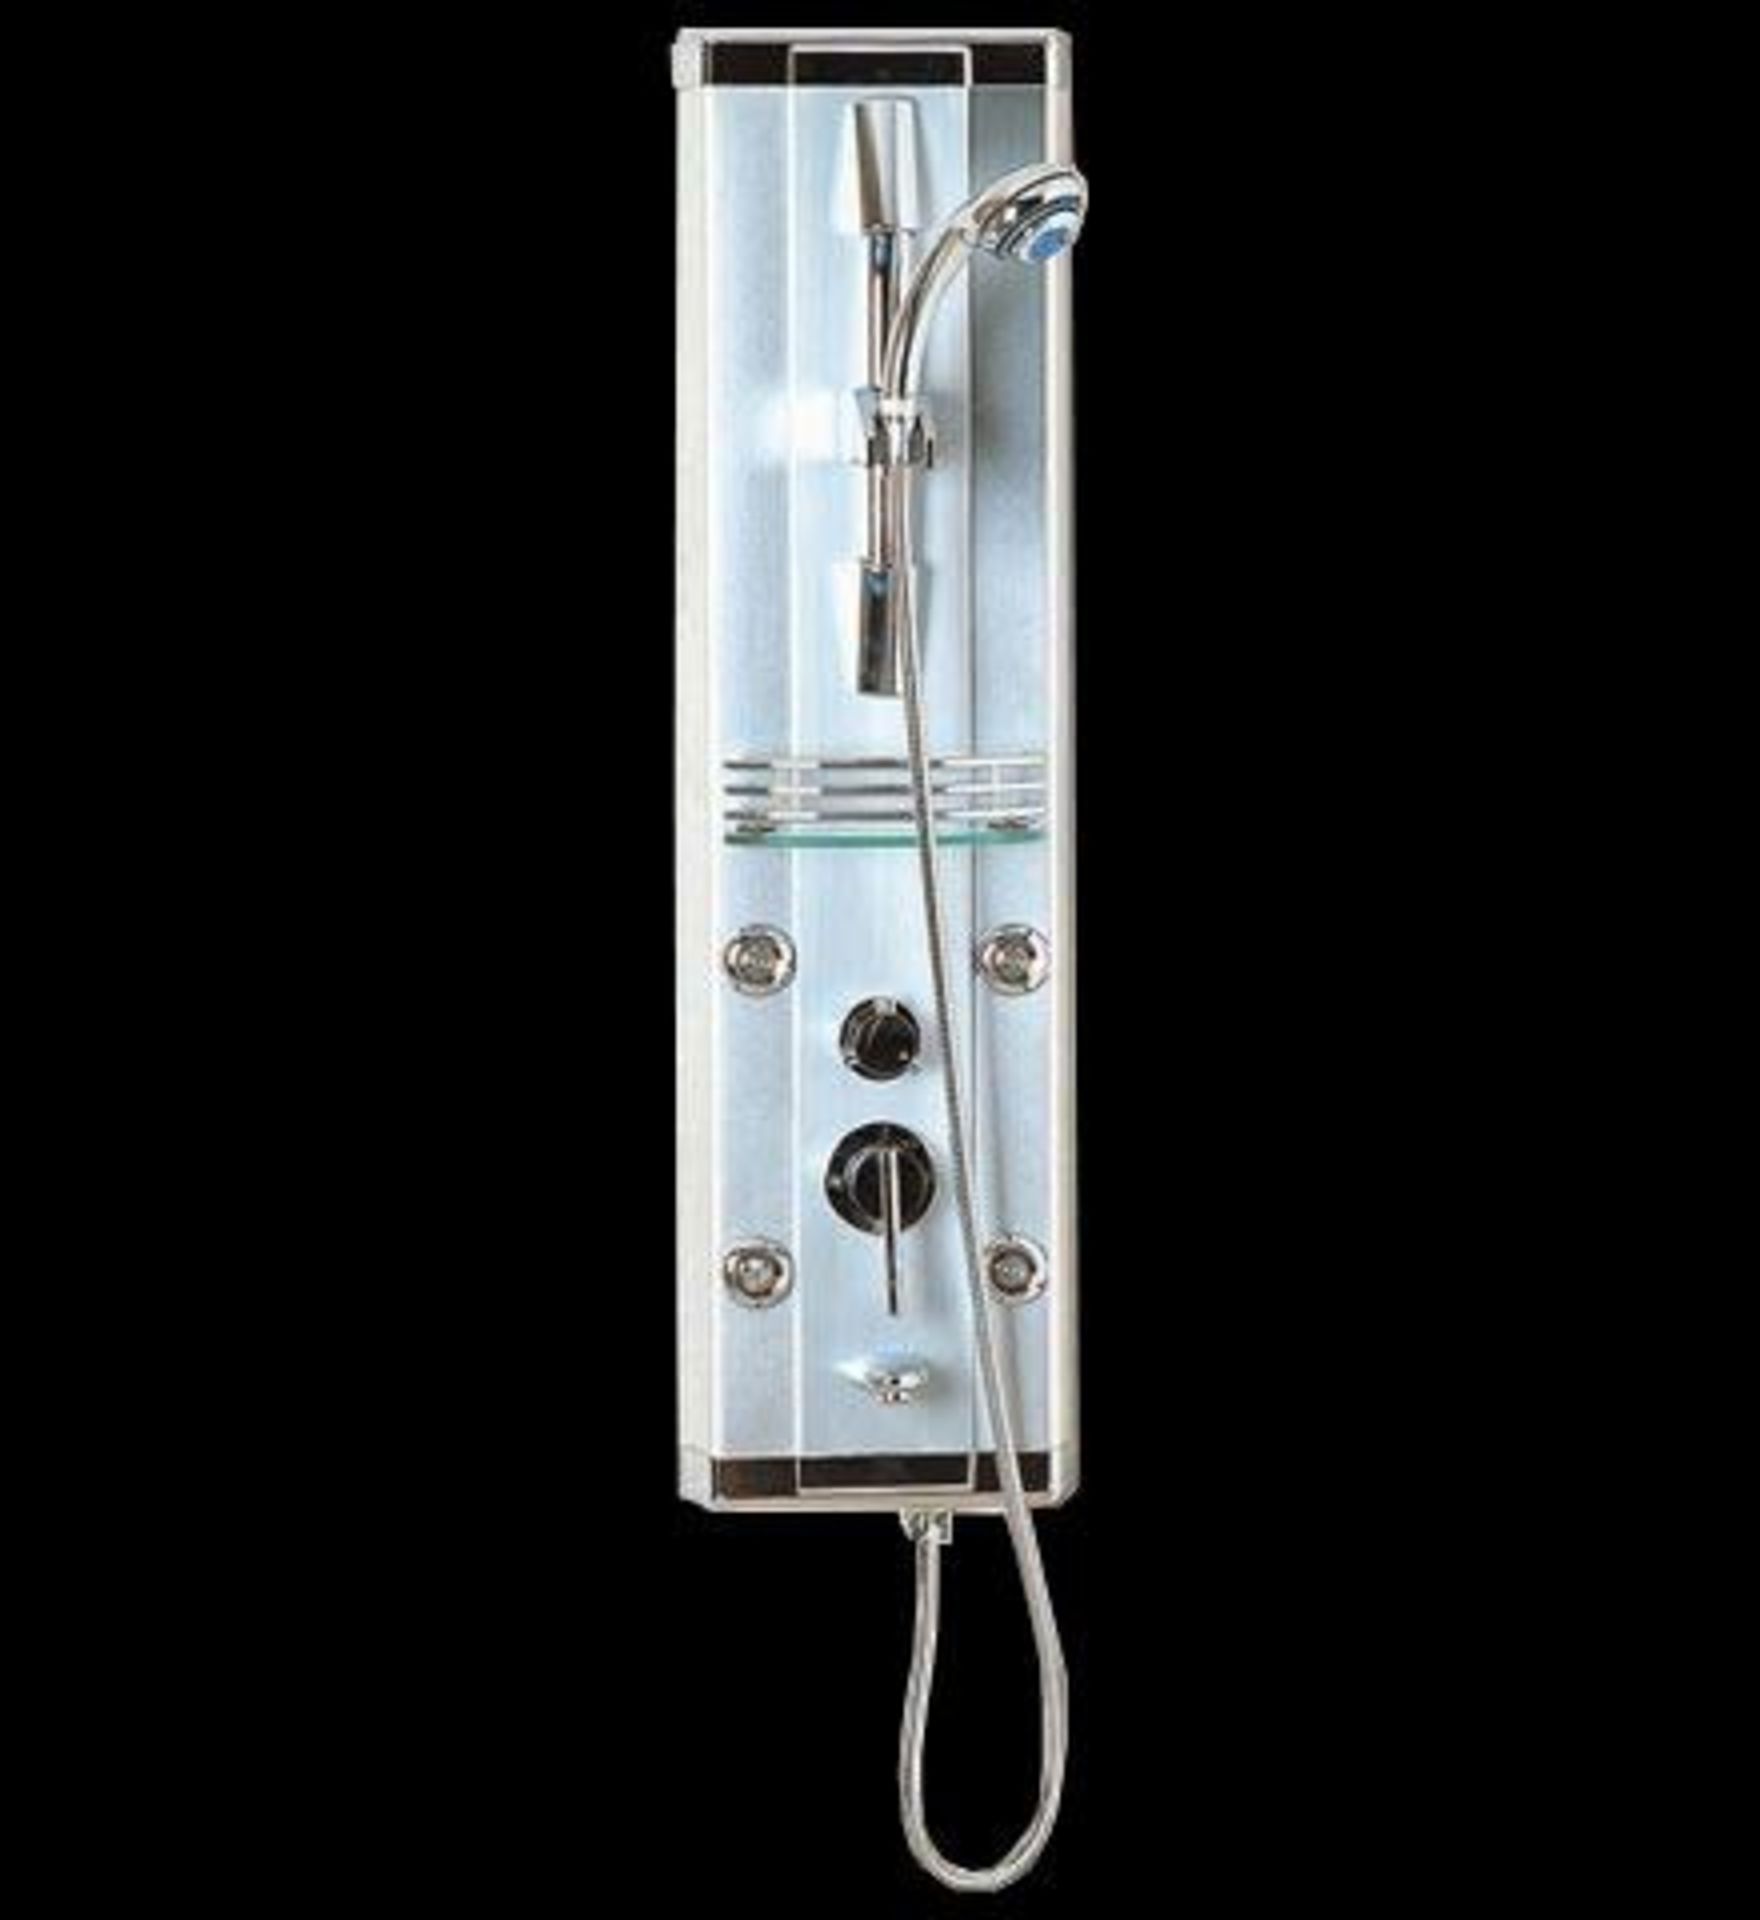 ADP001 aluminium, body jet shower panel new boxed delivery possible on this item, to anywhere, price